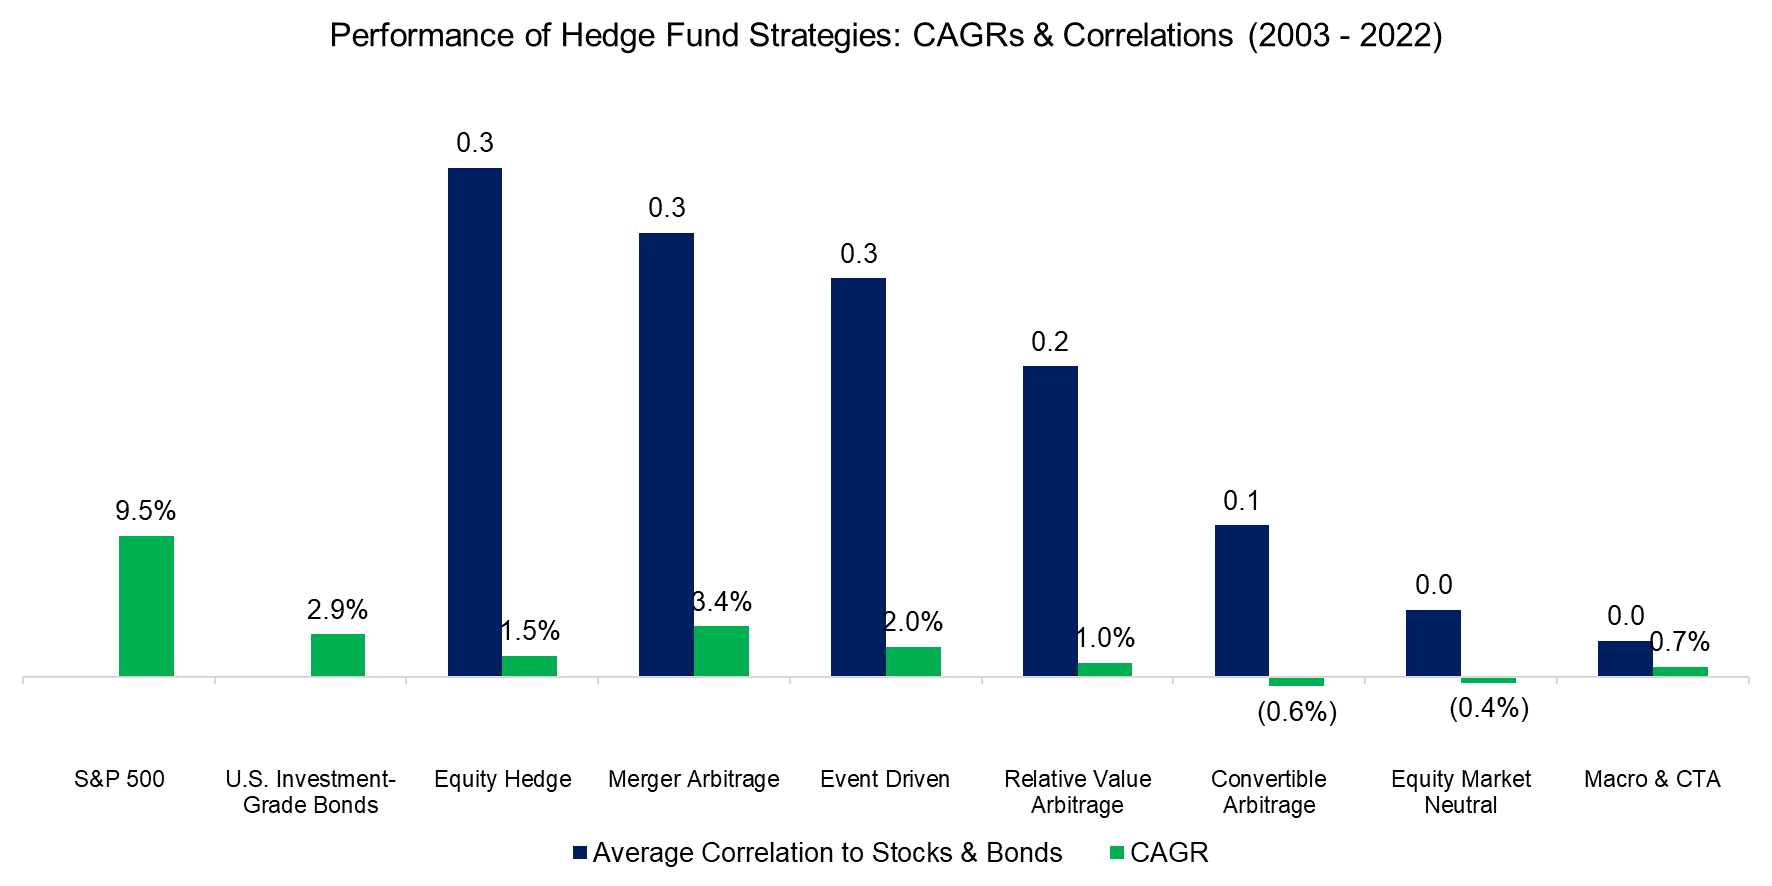 Performance of Hedge Fund Strategies CAGRs & Correlations (2003 - 2022)